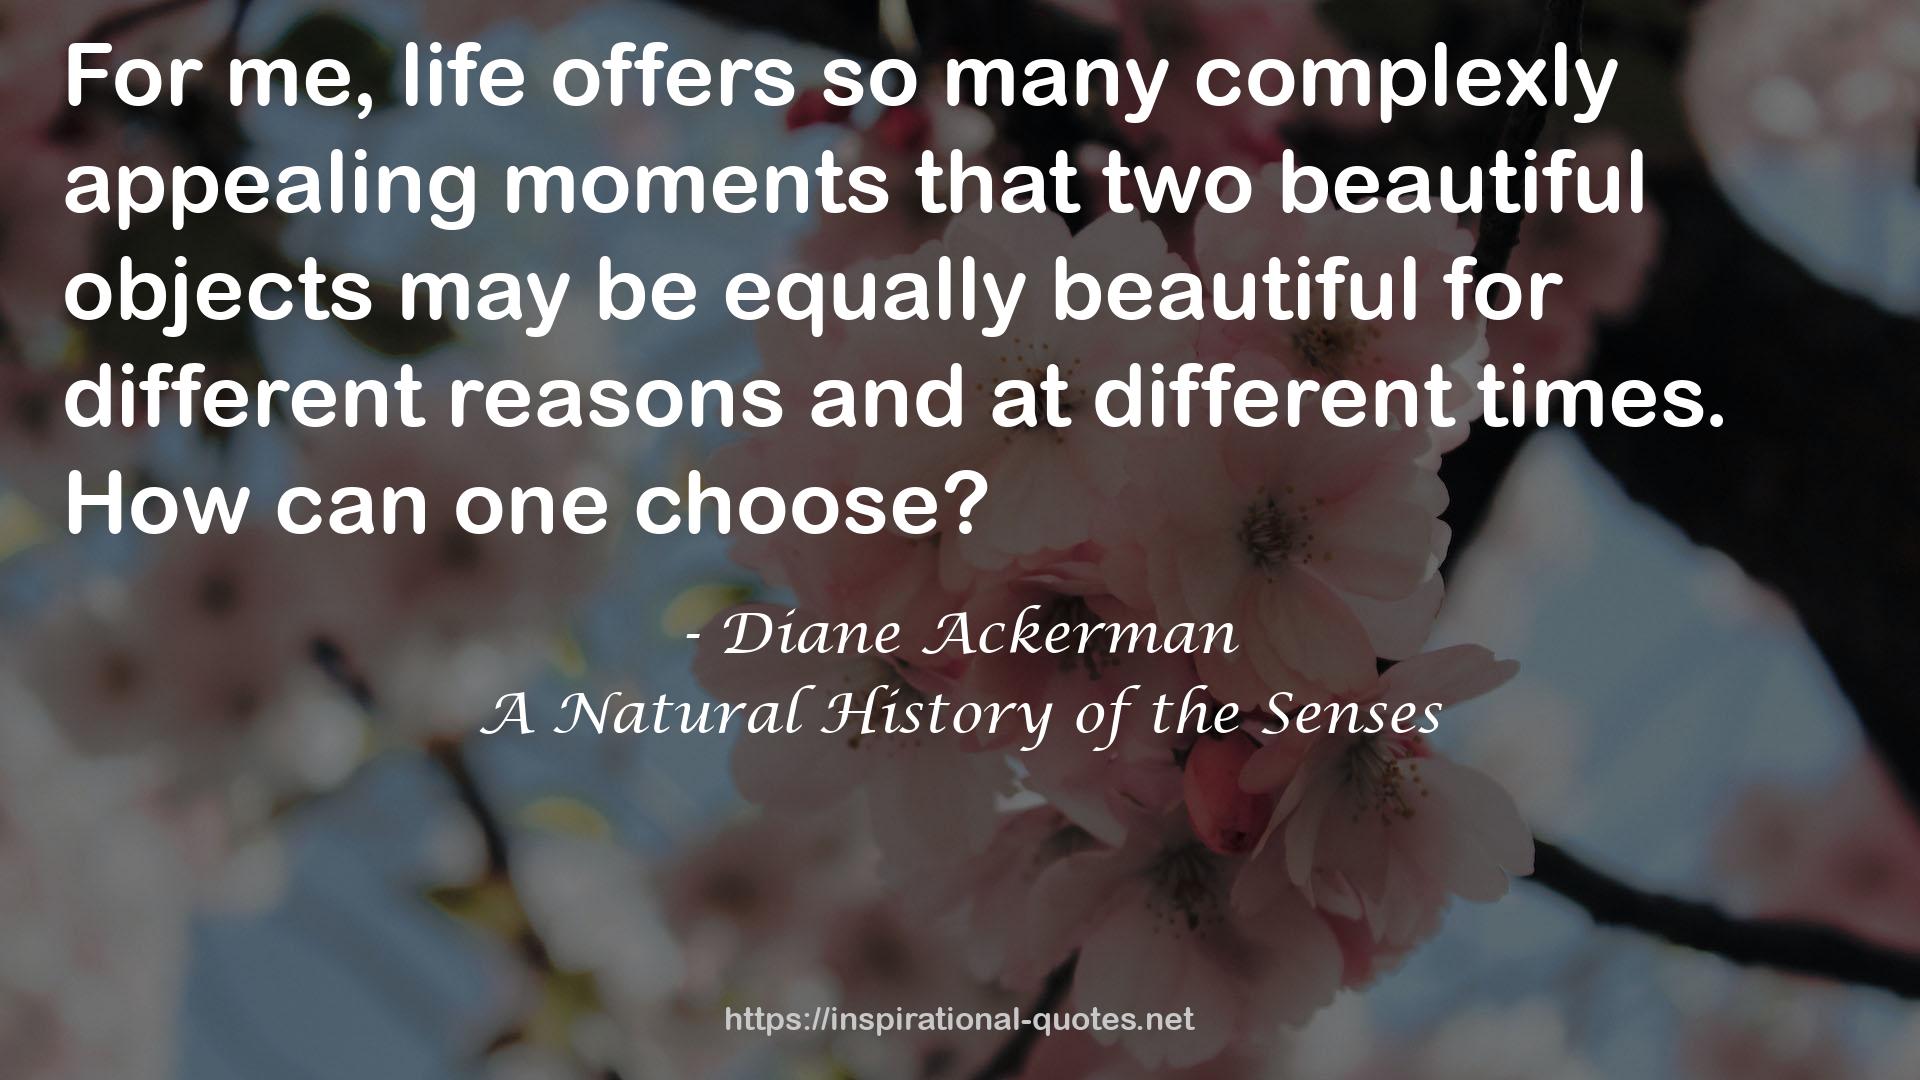 A Natural History of the Senses QUOTES